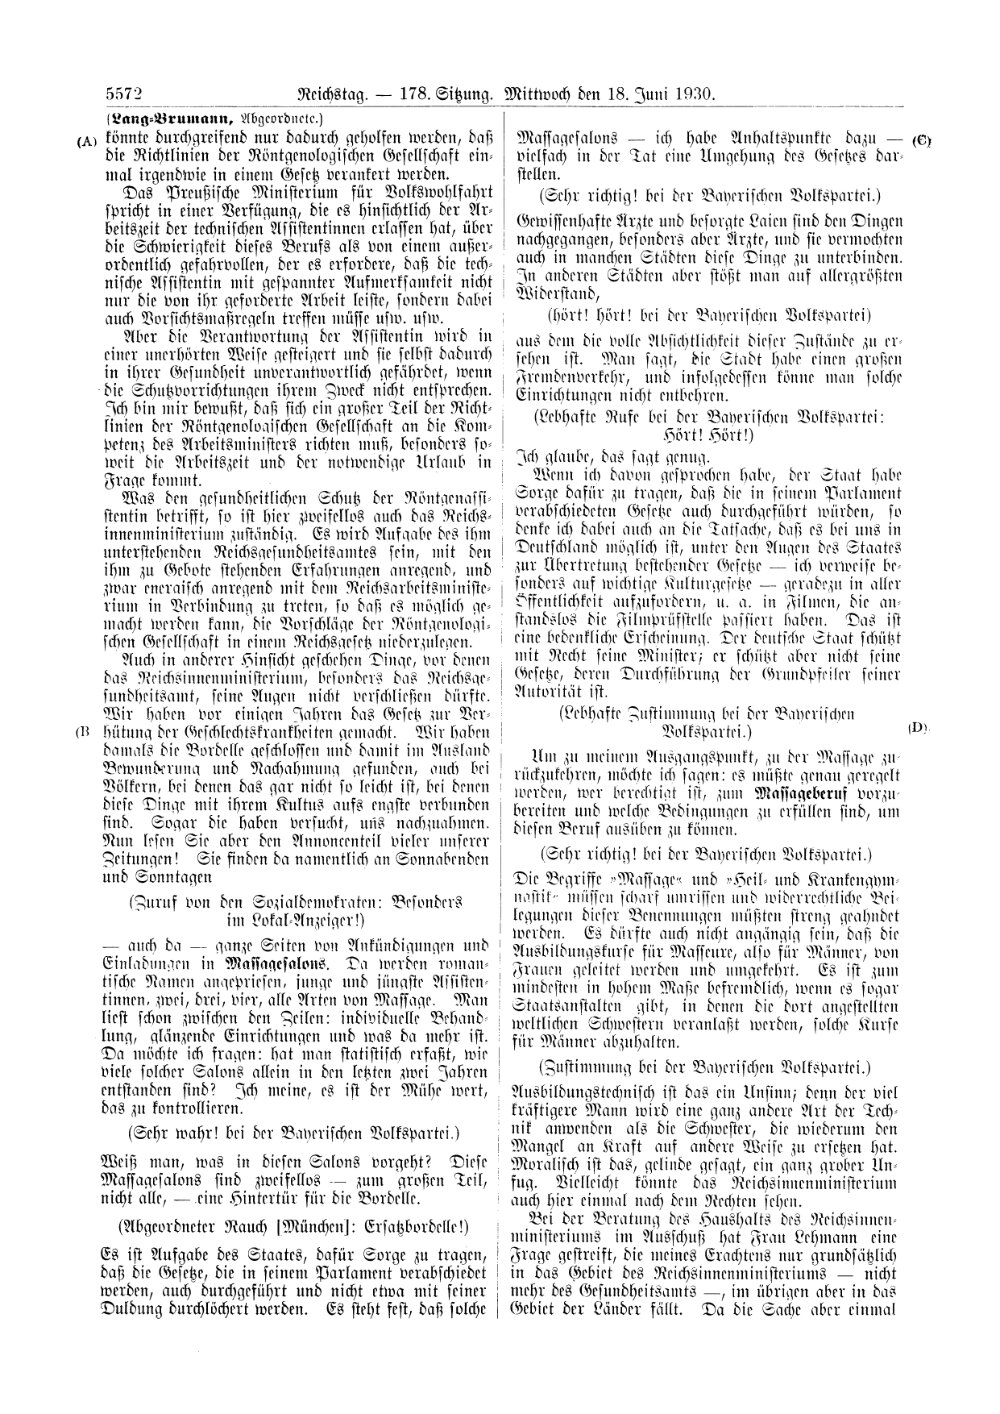 Scan of page 5572